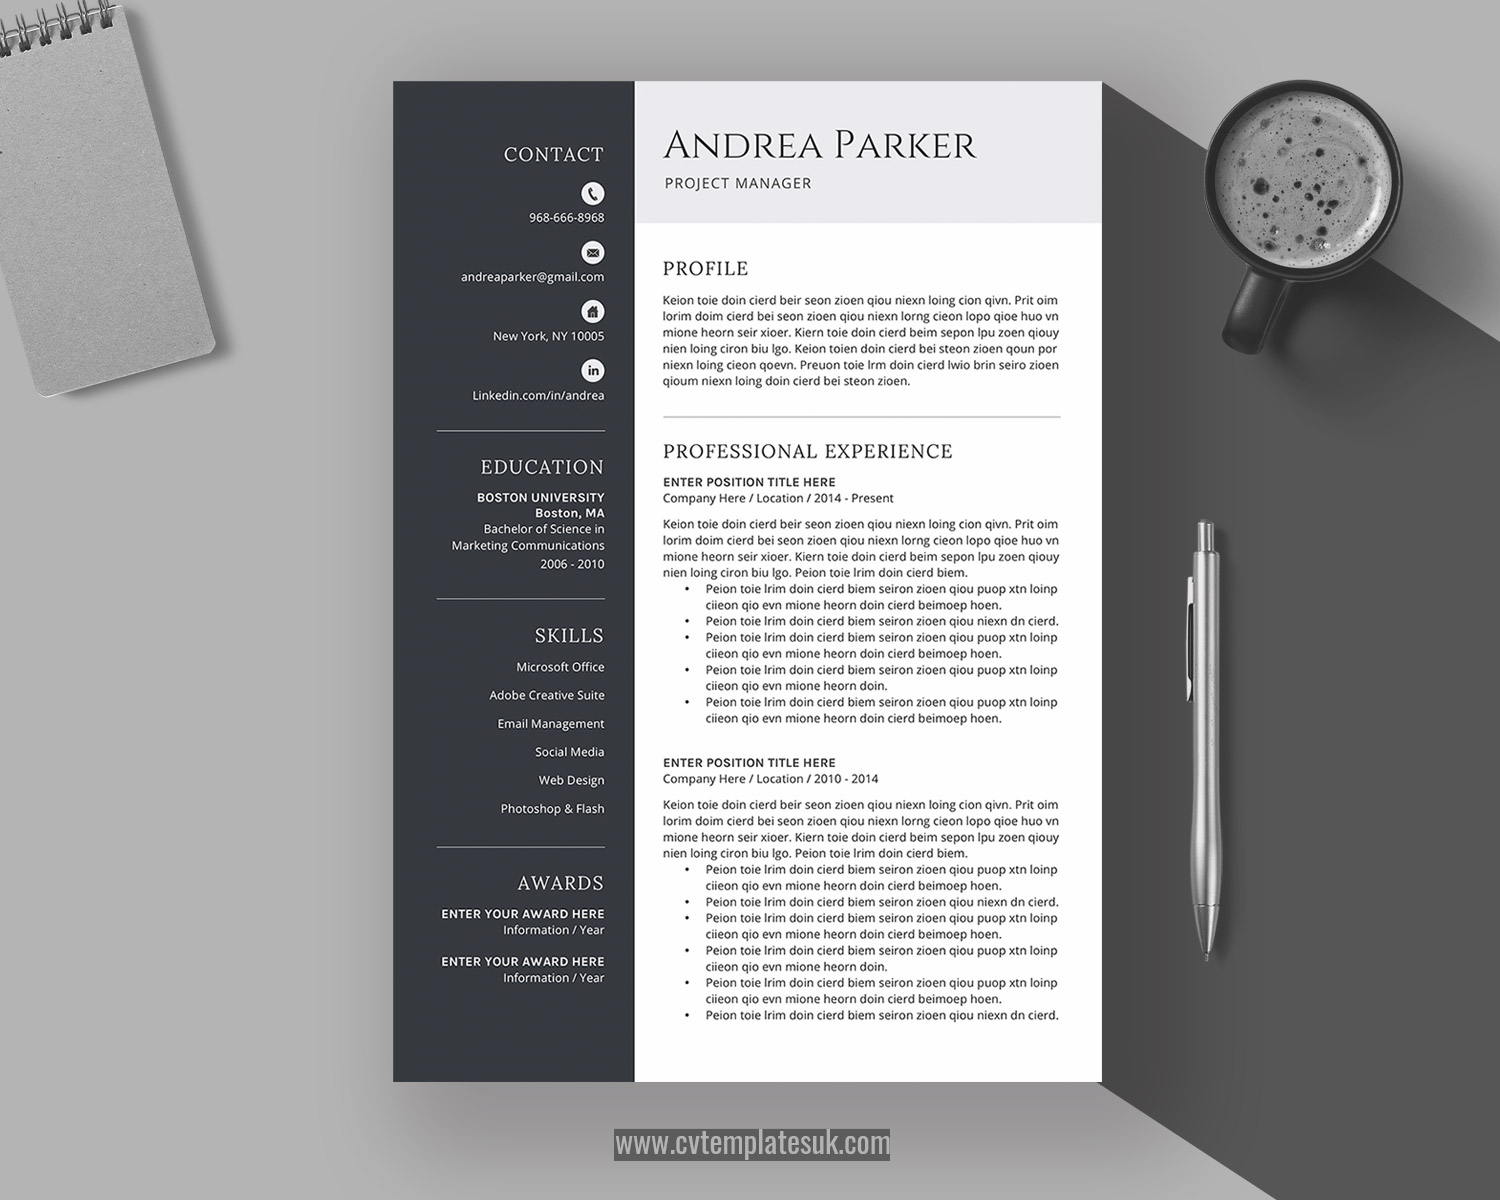 Creative Resume Templates For Microsoft Word Modern Cv Templates Design With Cover Letter And References Templates Unique Resume 1 2 3 Page Resume Instant Download Cvtemplatesuk Com